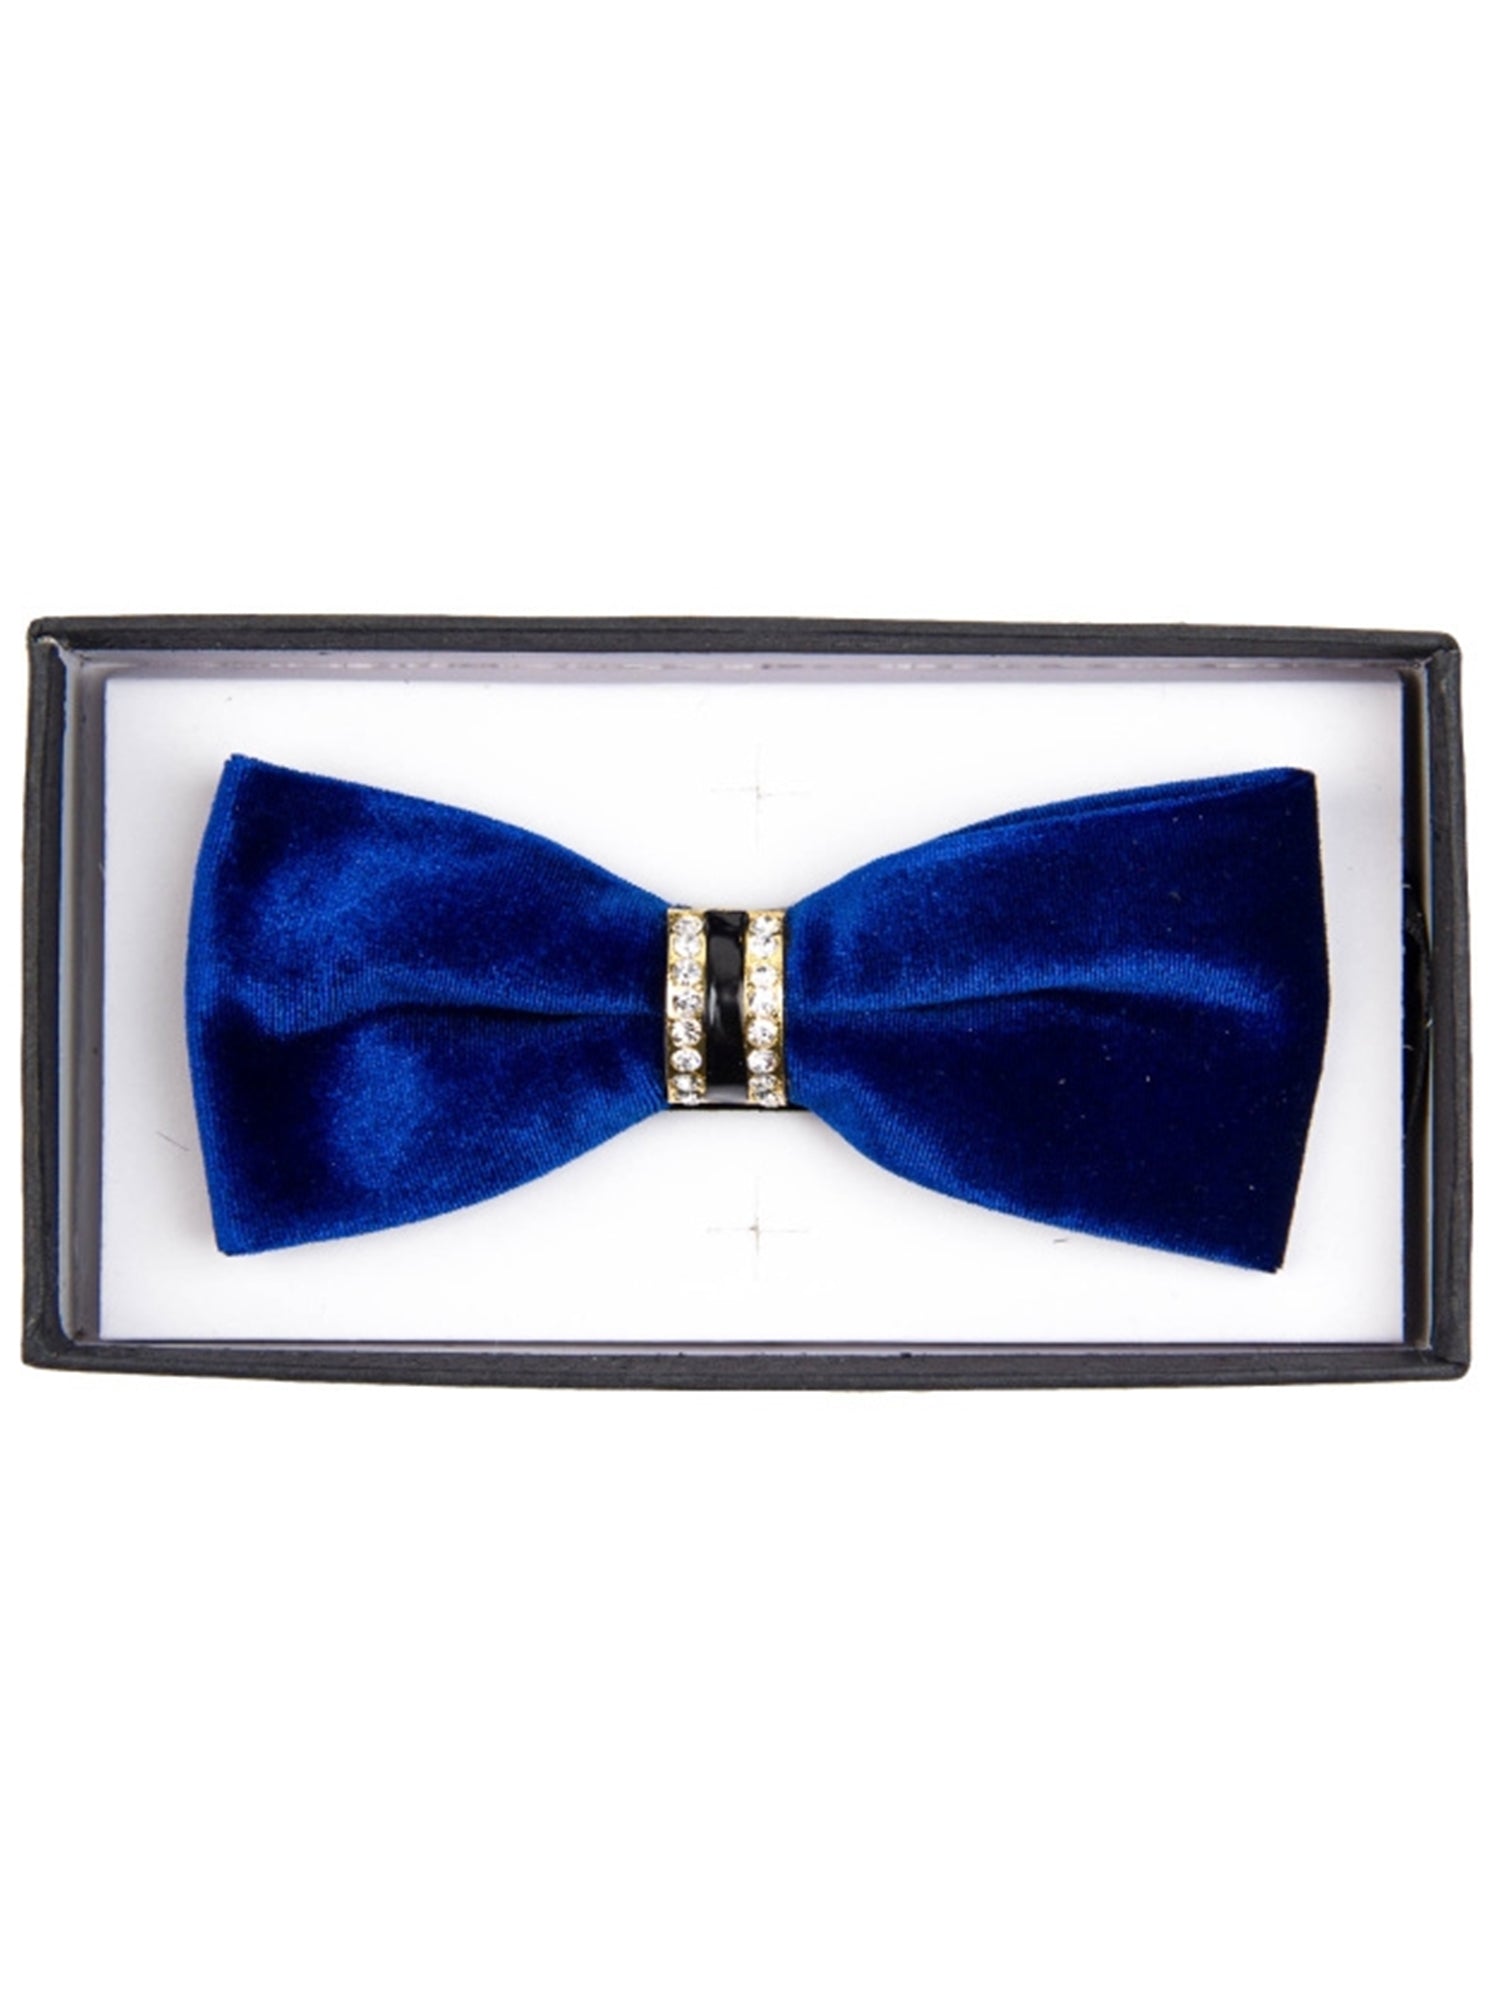 Men's Solid Color Velvet Pre-tied Adjustable Length Bow Tie with Rhinestone Men's Solid Color Bow Tie TheDapperTie Royal Blue One Size 